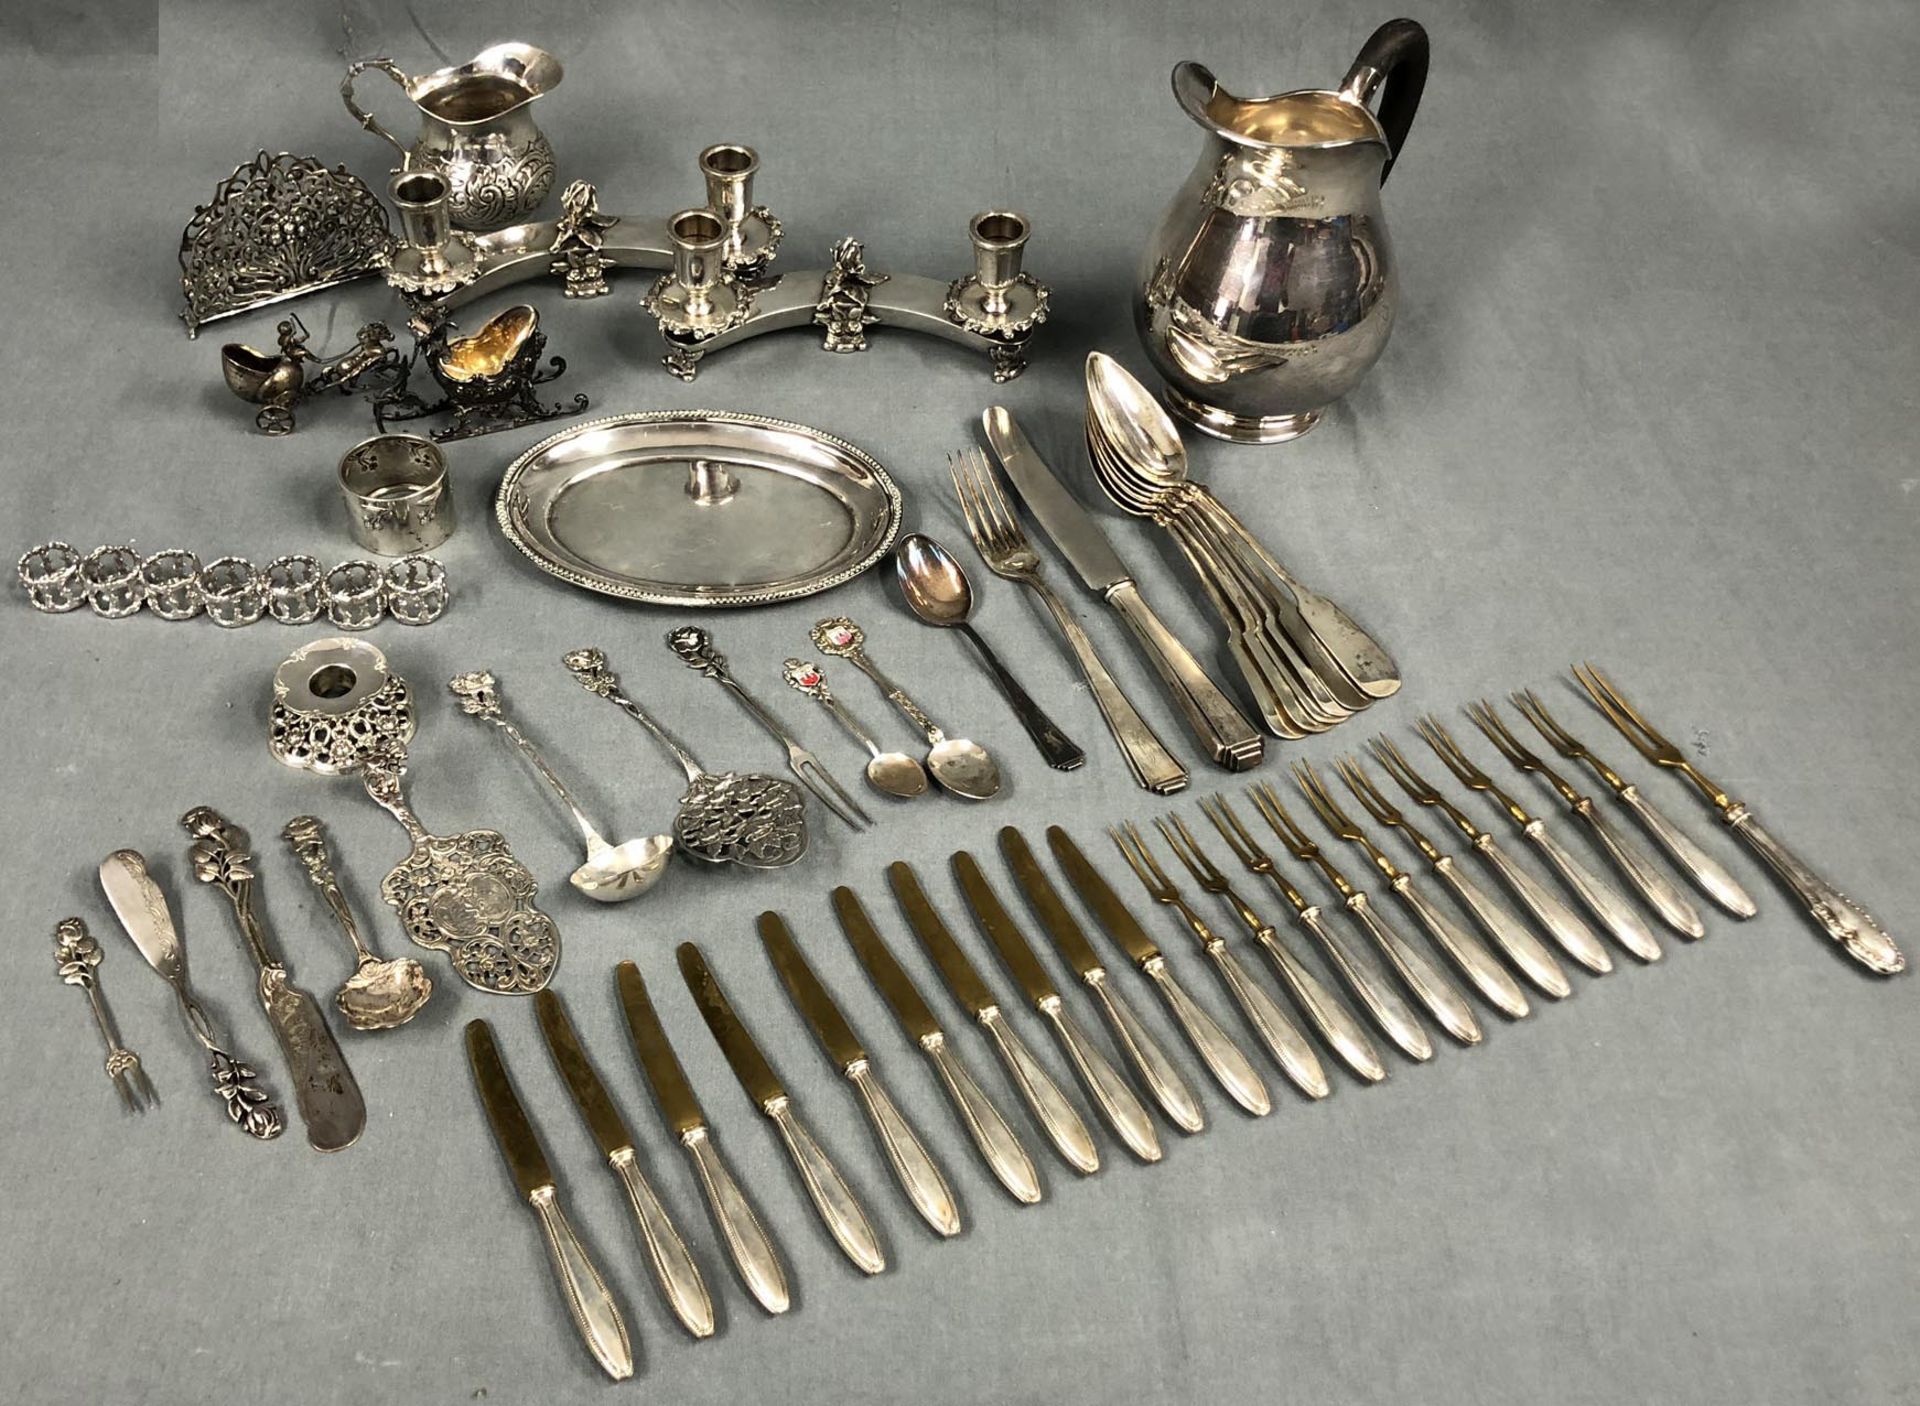 Silver. Some items Sterling.(12 + 13 + 15 + 41). 3084 grams gross. In addition 2 boxes.Silber.